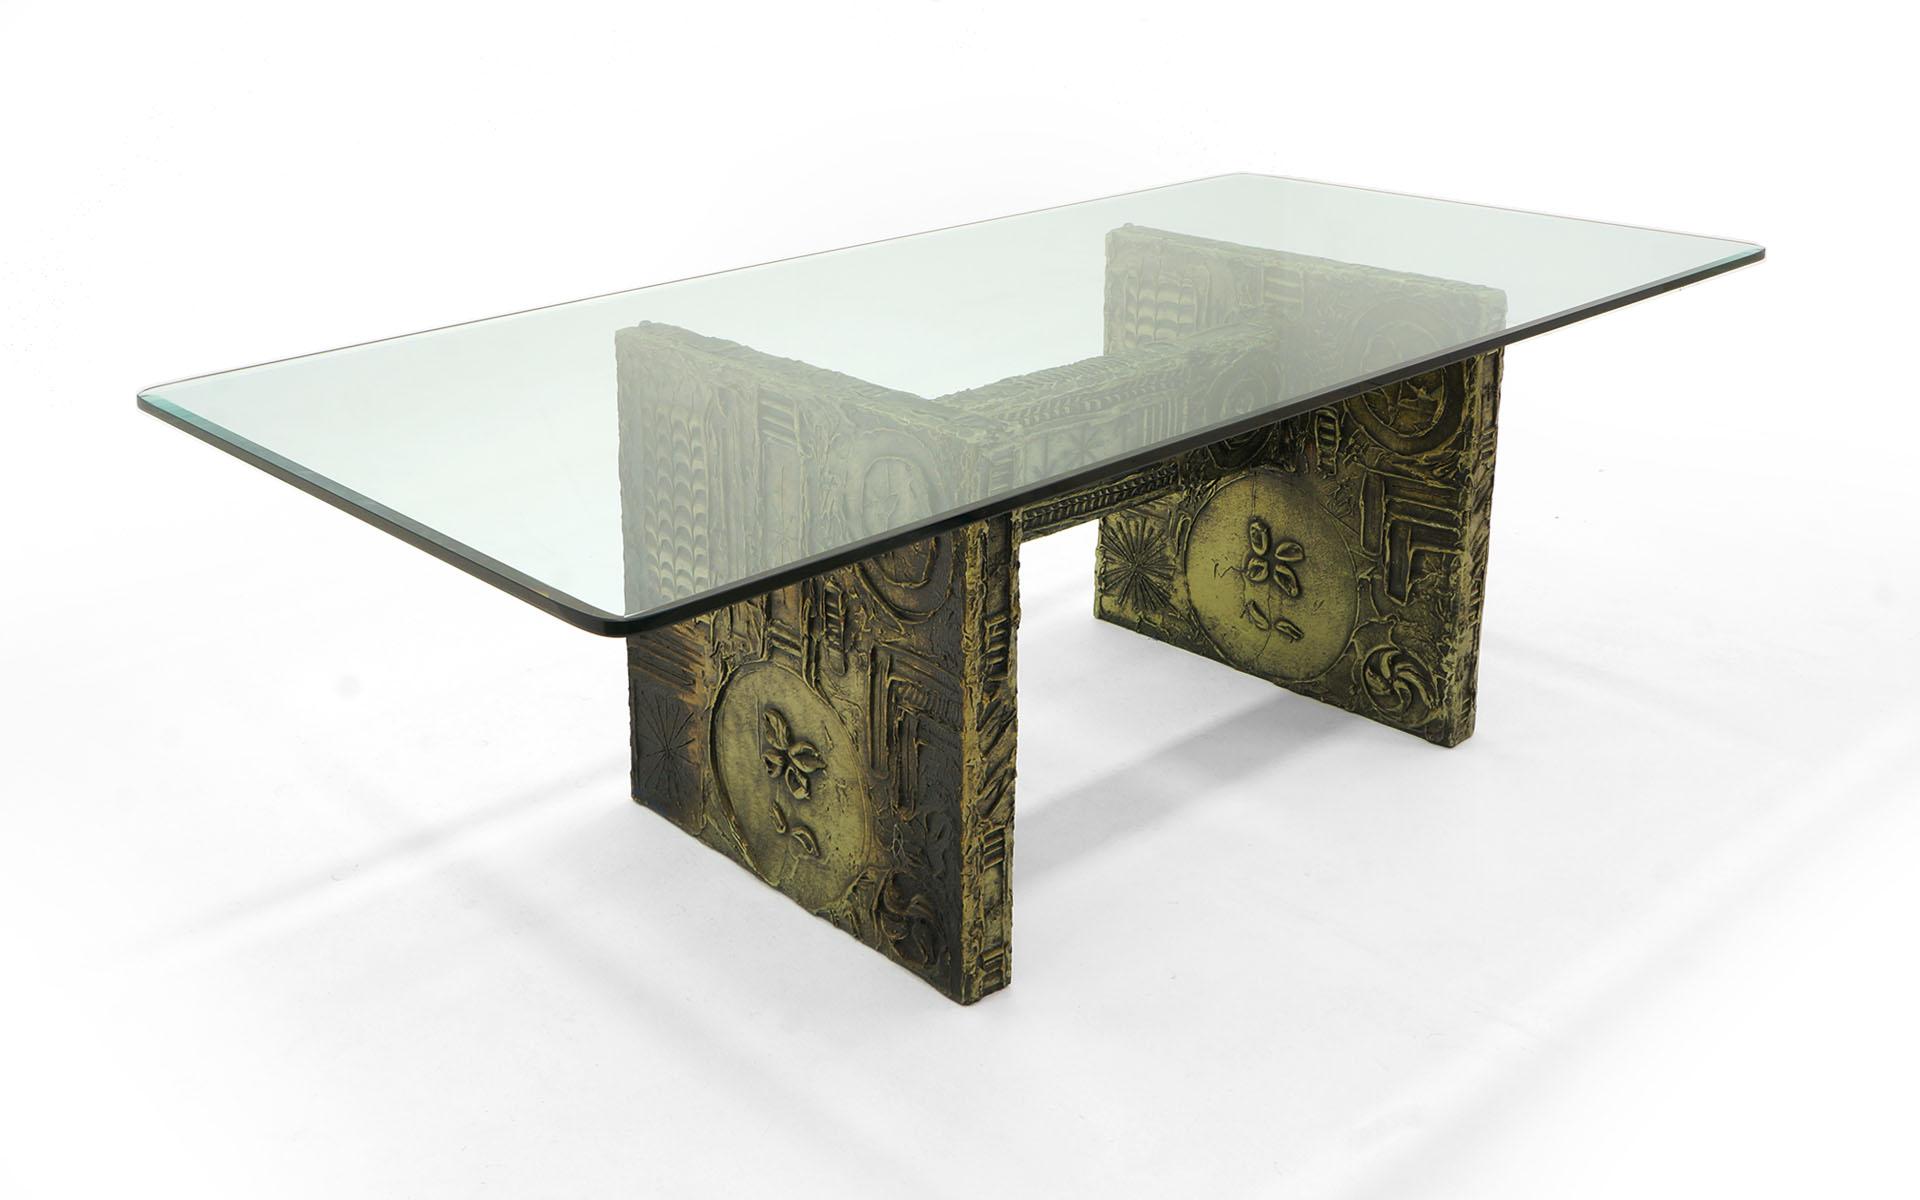 Adrian Pearsall dining table for Craft Associates. Half inch thick rectangular glass top sits on a brutalist designed base in the style of Paul Evans. The base is heavy, sturdy wood construction with a sculpted applied resin design. Glass is in